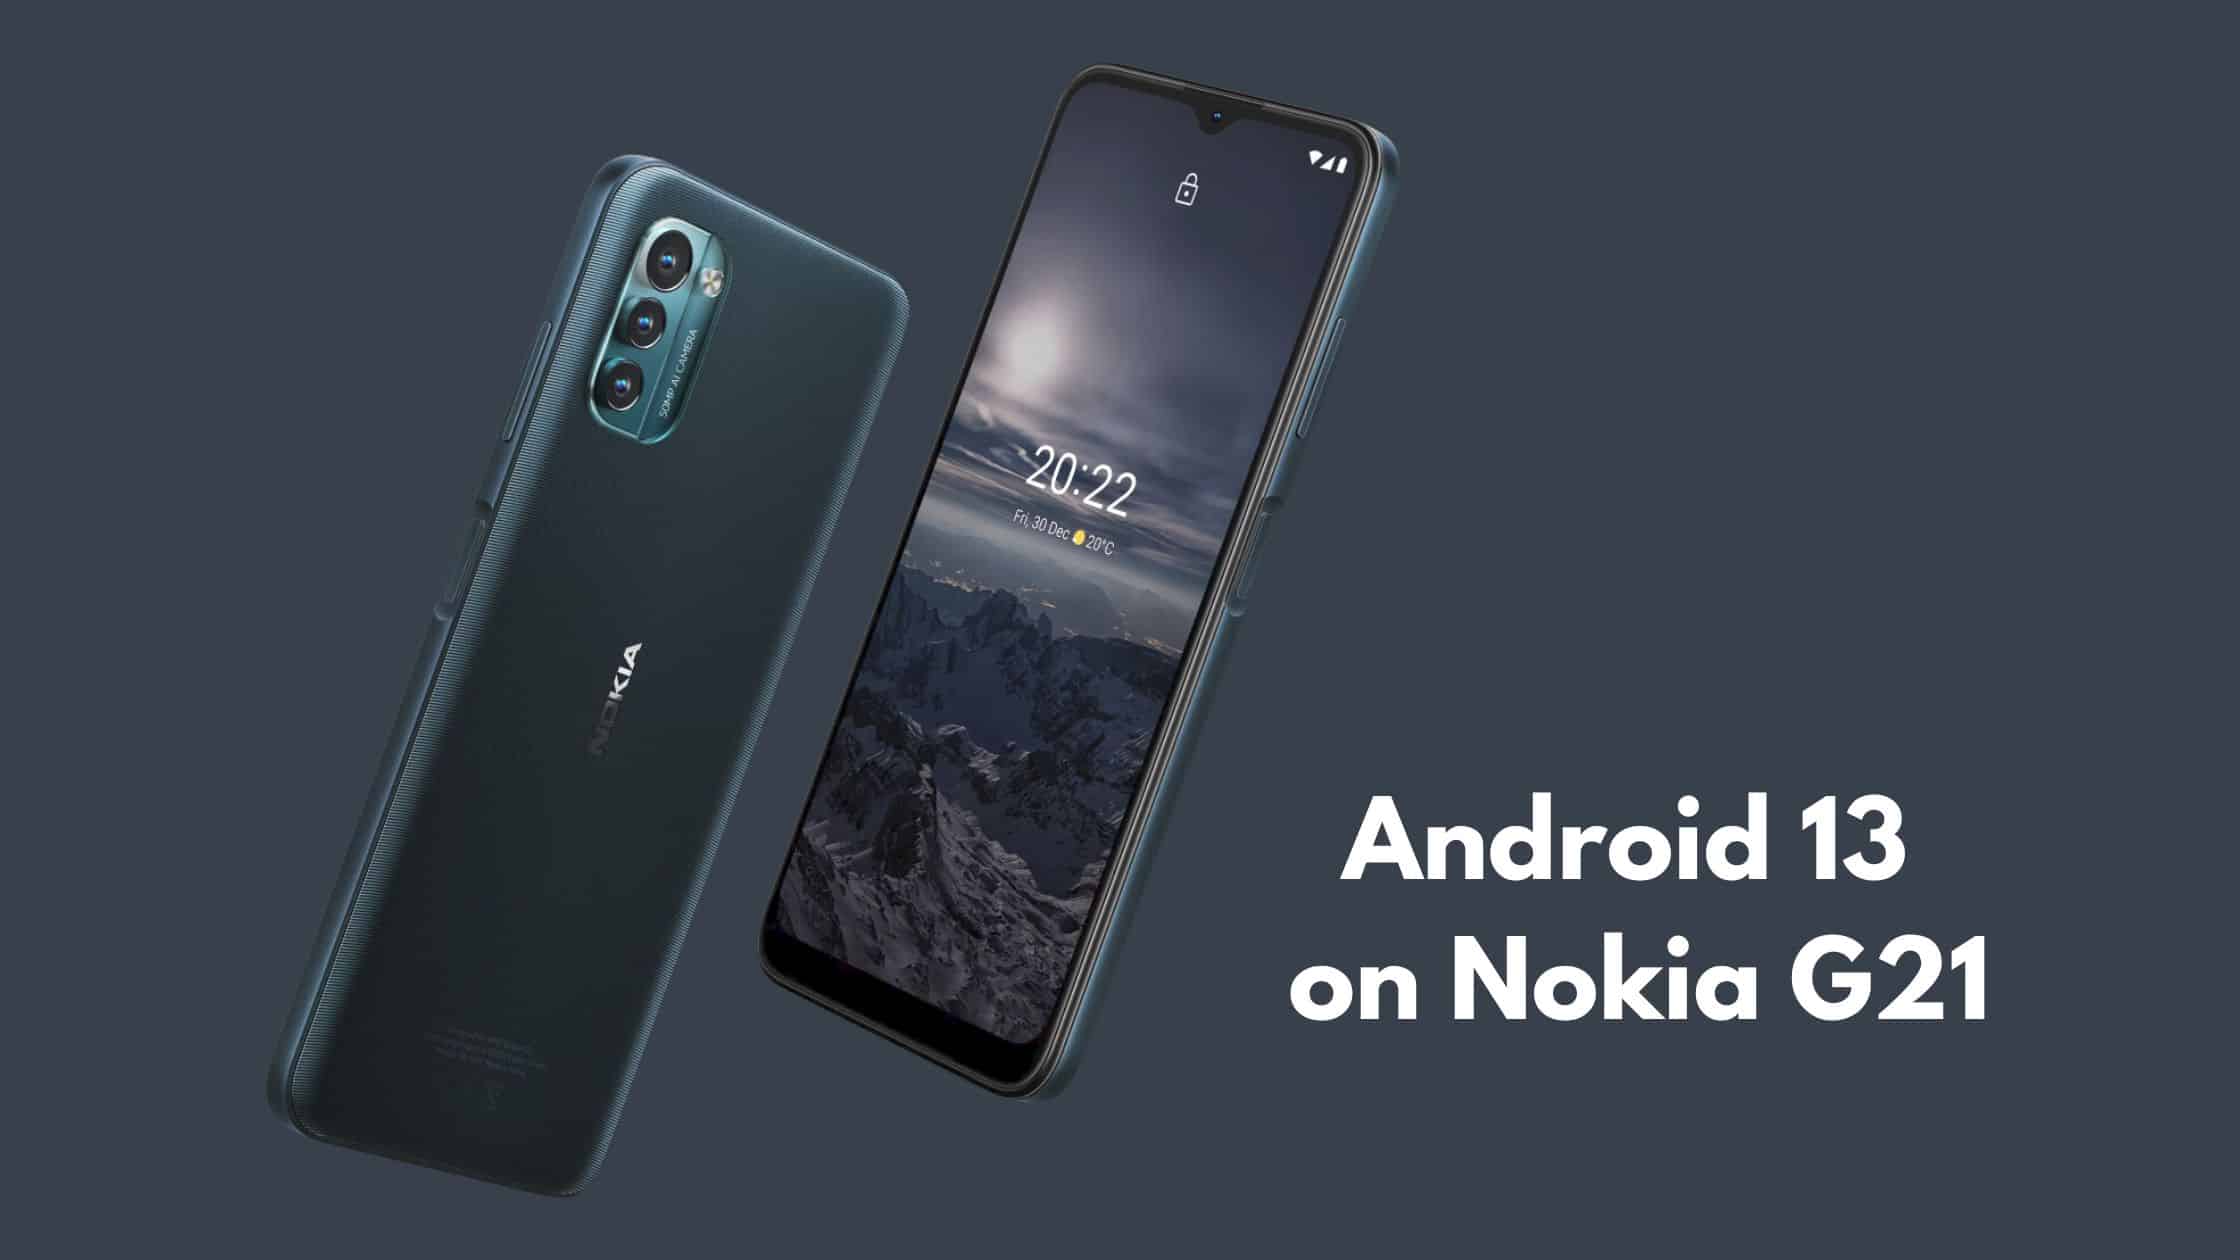 Nokia G21 receives Android 13 update